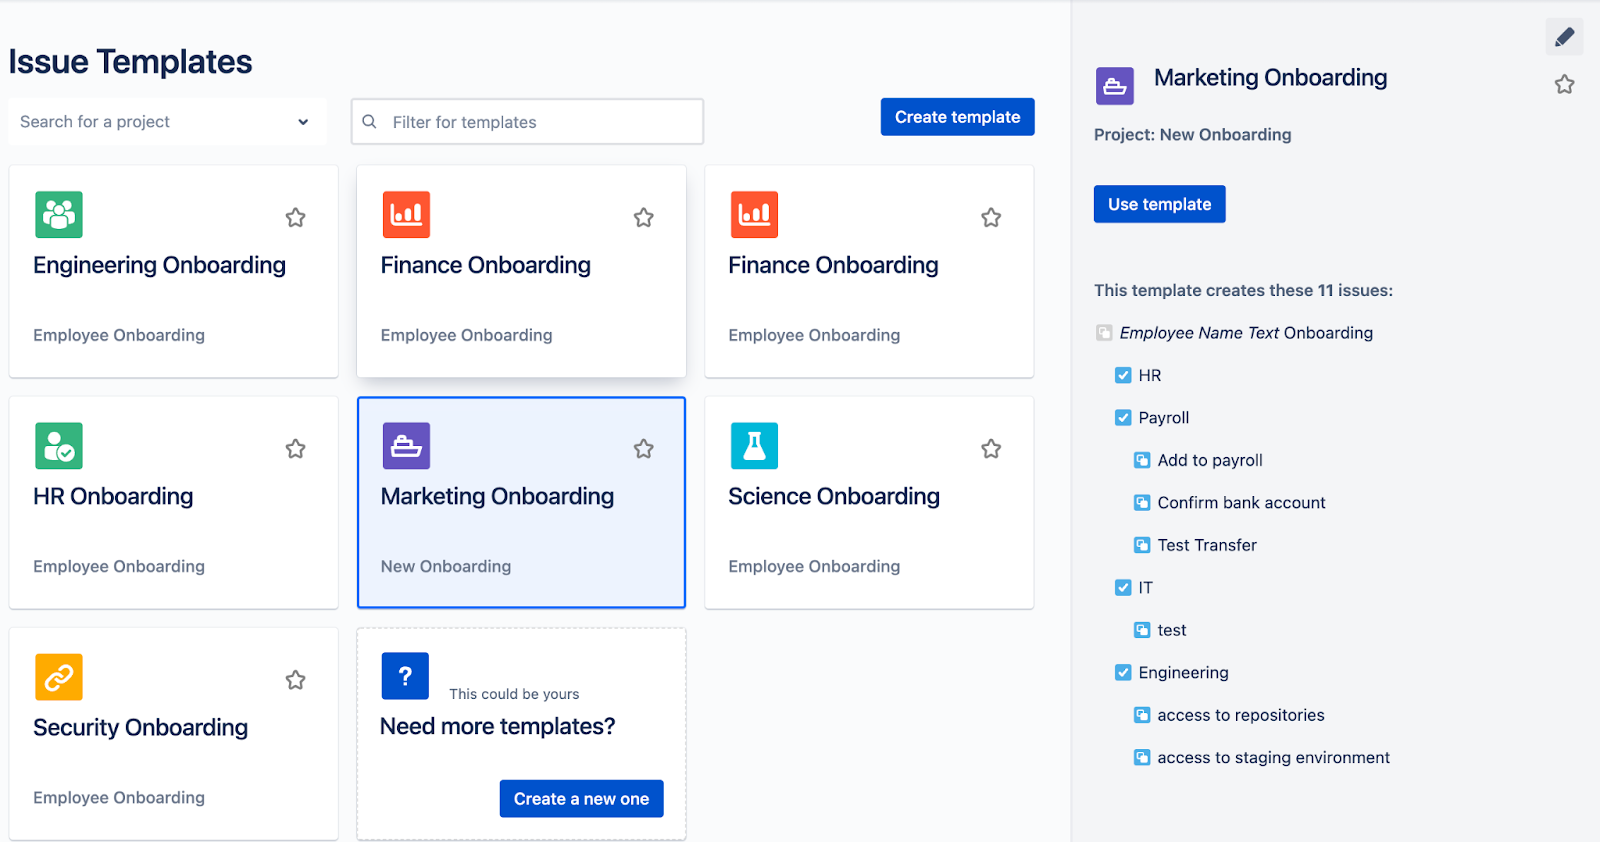 How to Easily Simplify your Onboarding Processes in Jira Cloud - choosing an issue template to create - marketing onboarding template selected